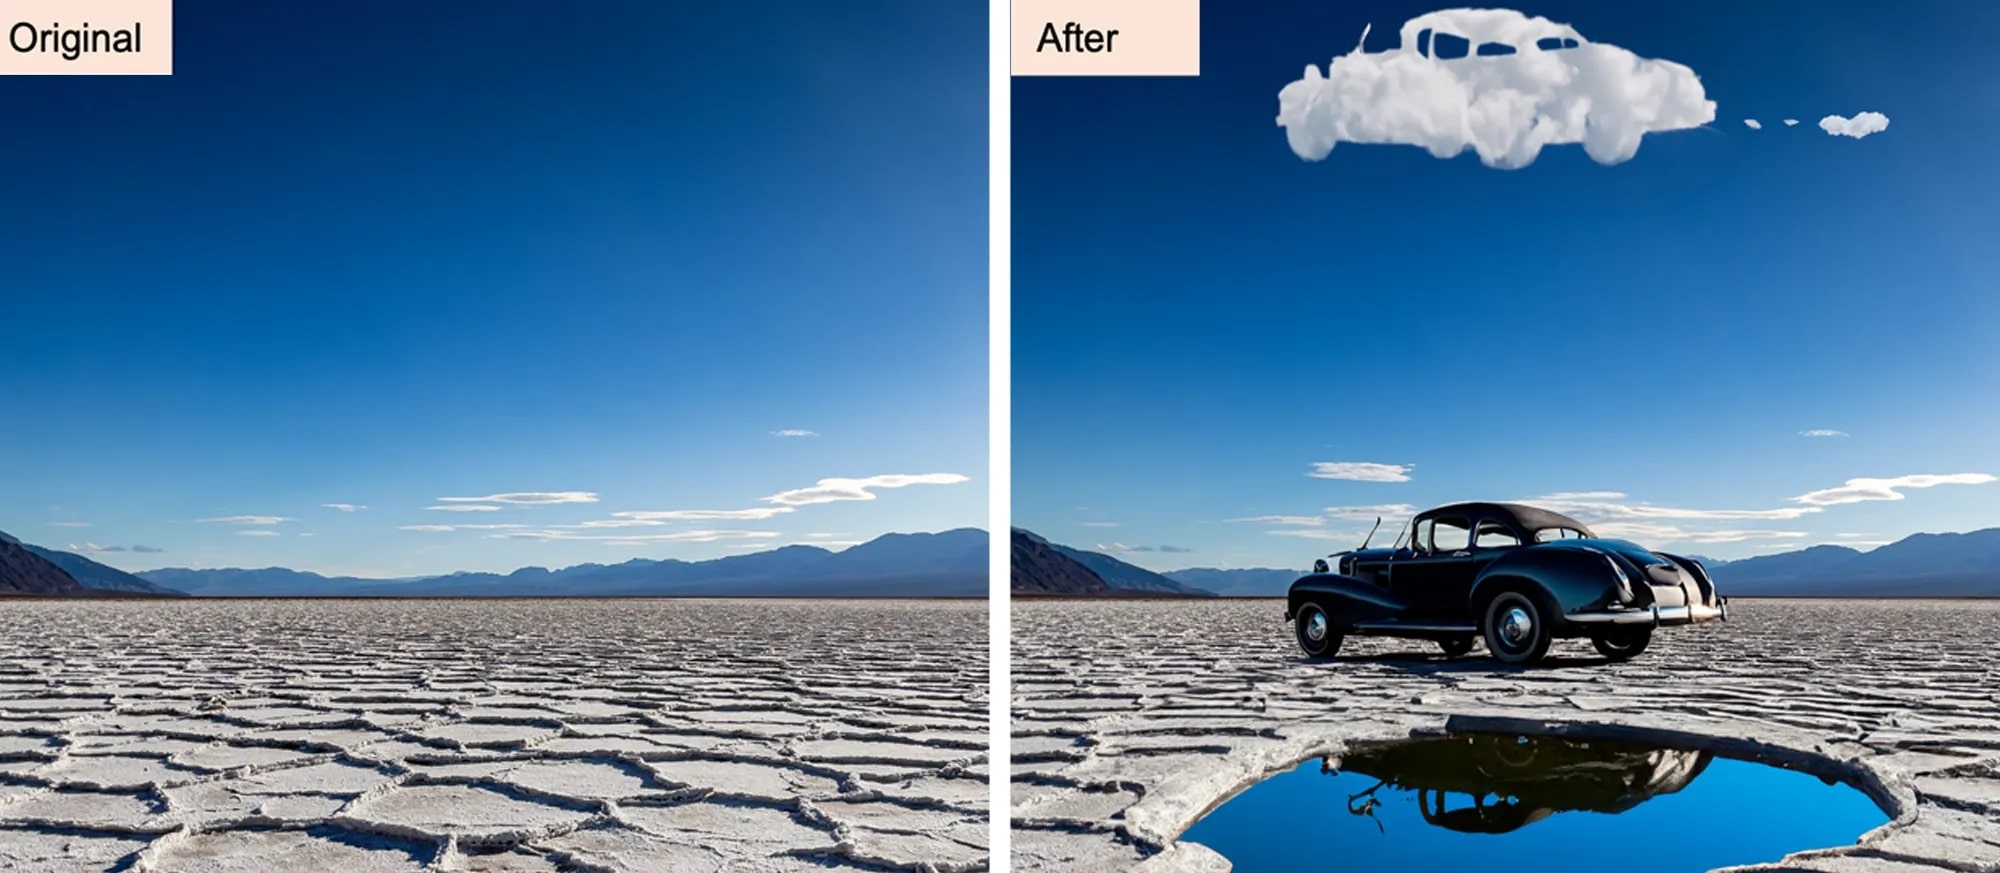 A mudflat on the left with mountains in the background. On the right is the same mudflat with a car and pond superimposed into the foreground and a car-shaped cloud in the sky. This image was made with Adobe Photoshop's Generative Fill tool.